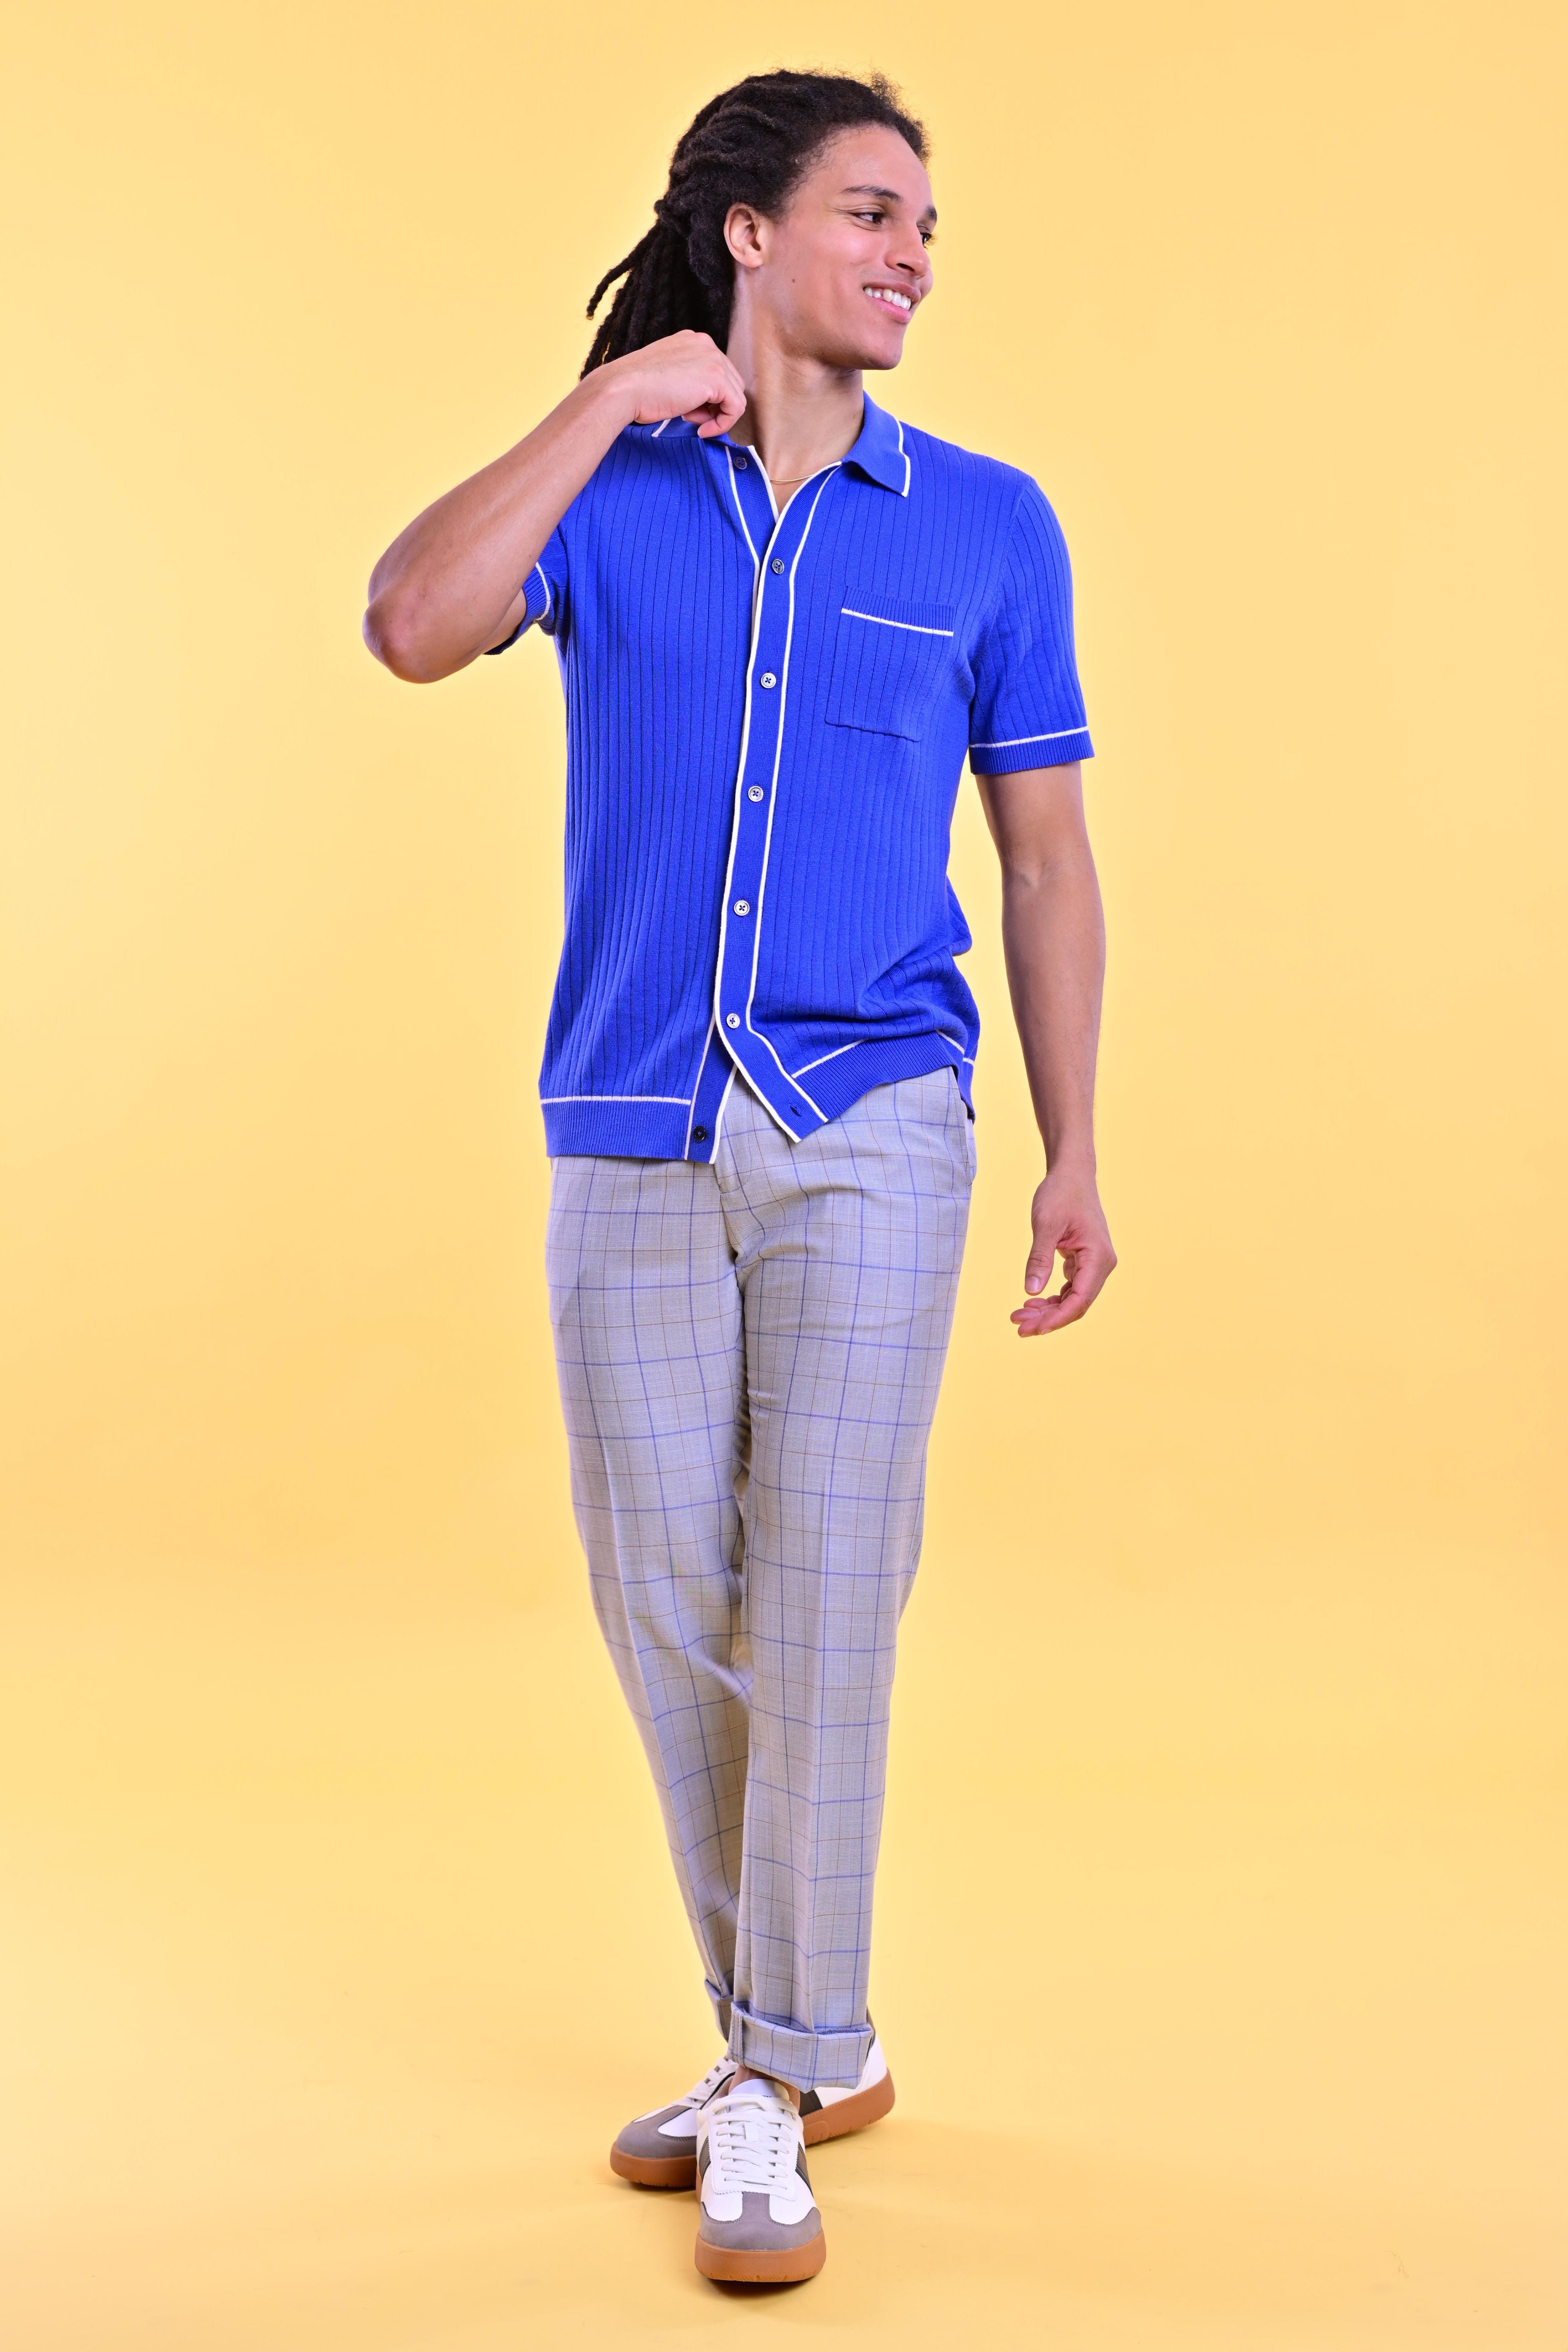 Full Placket Tipped Polo - Royal